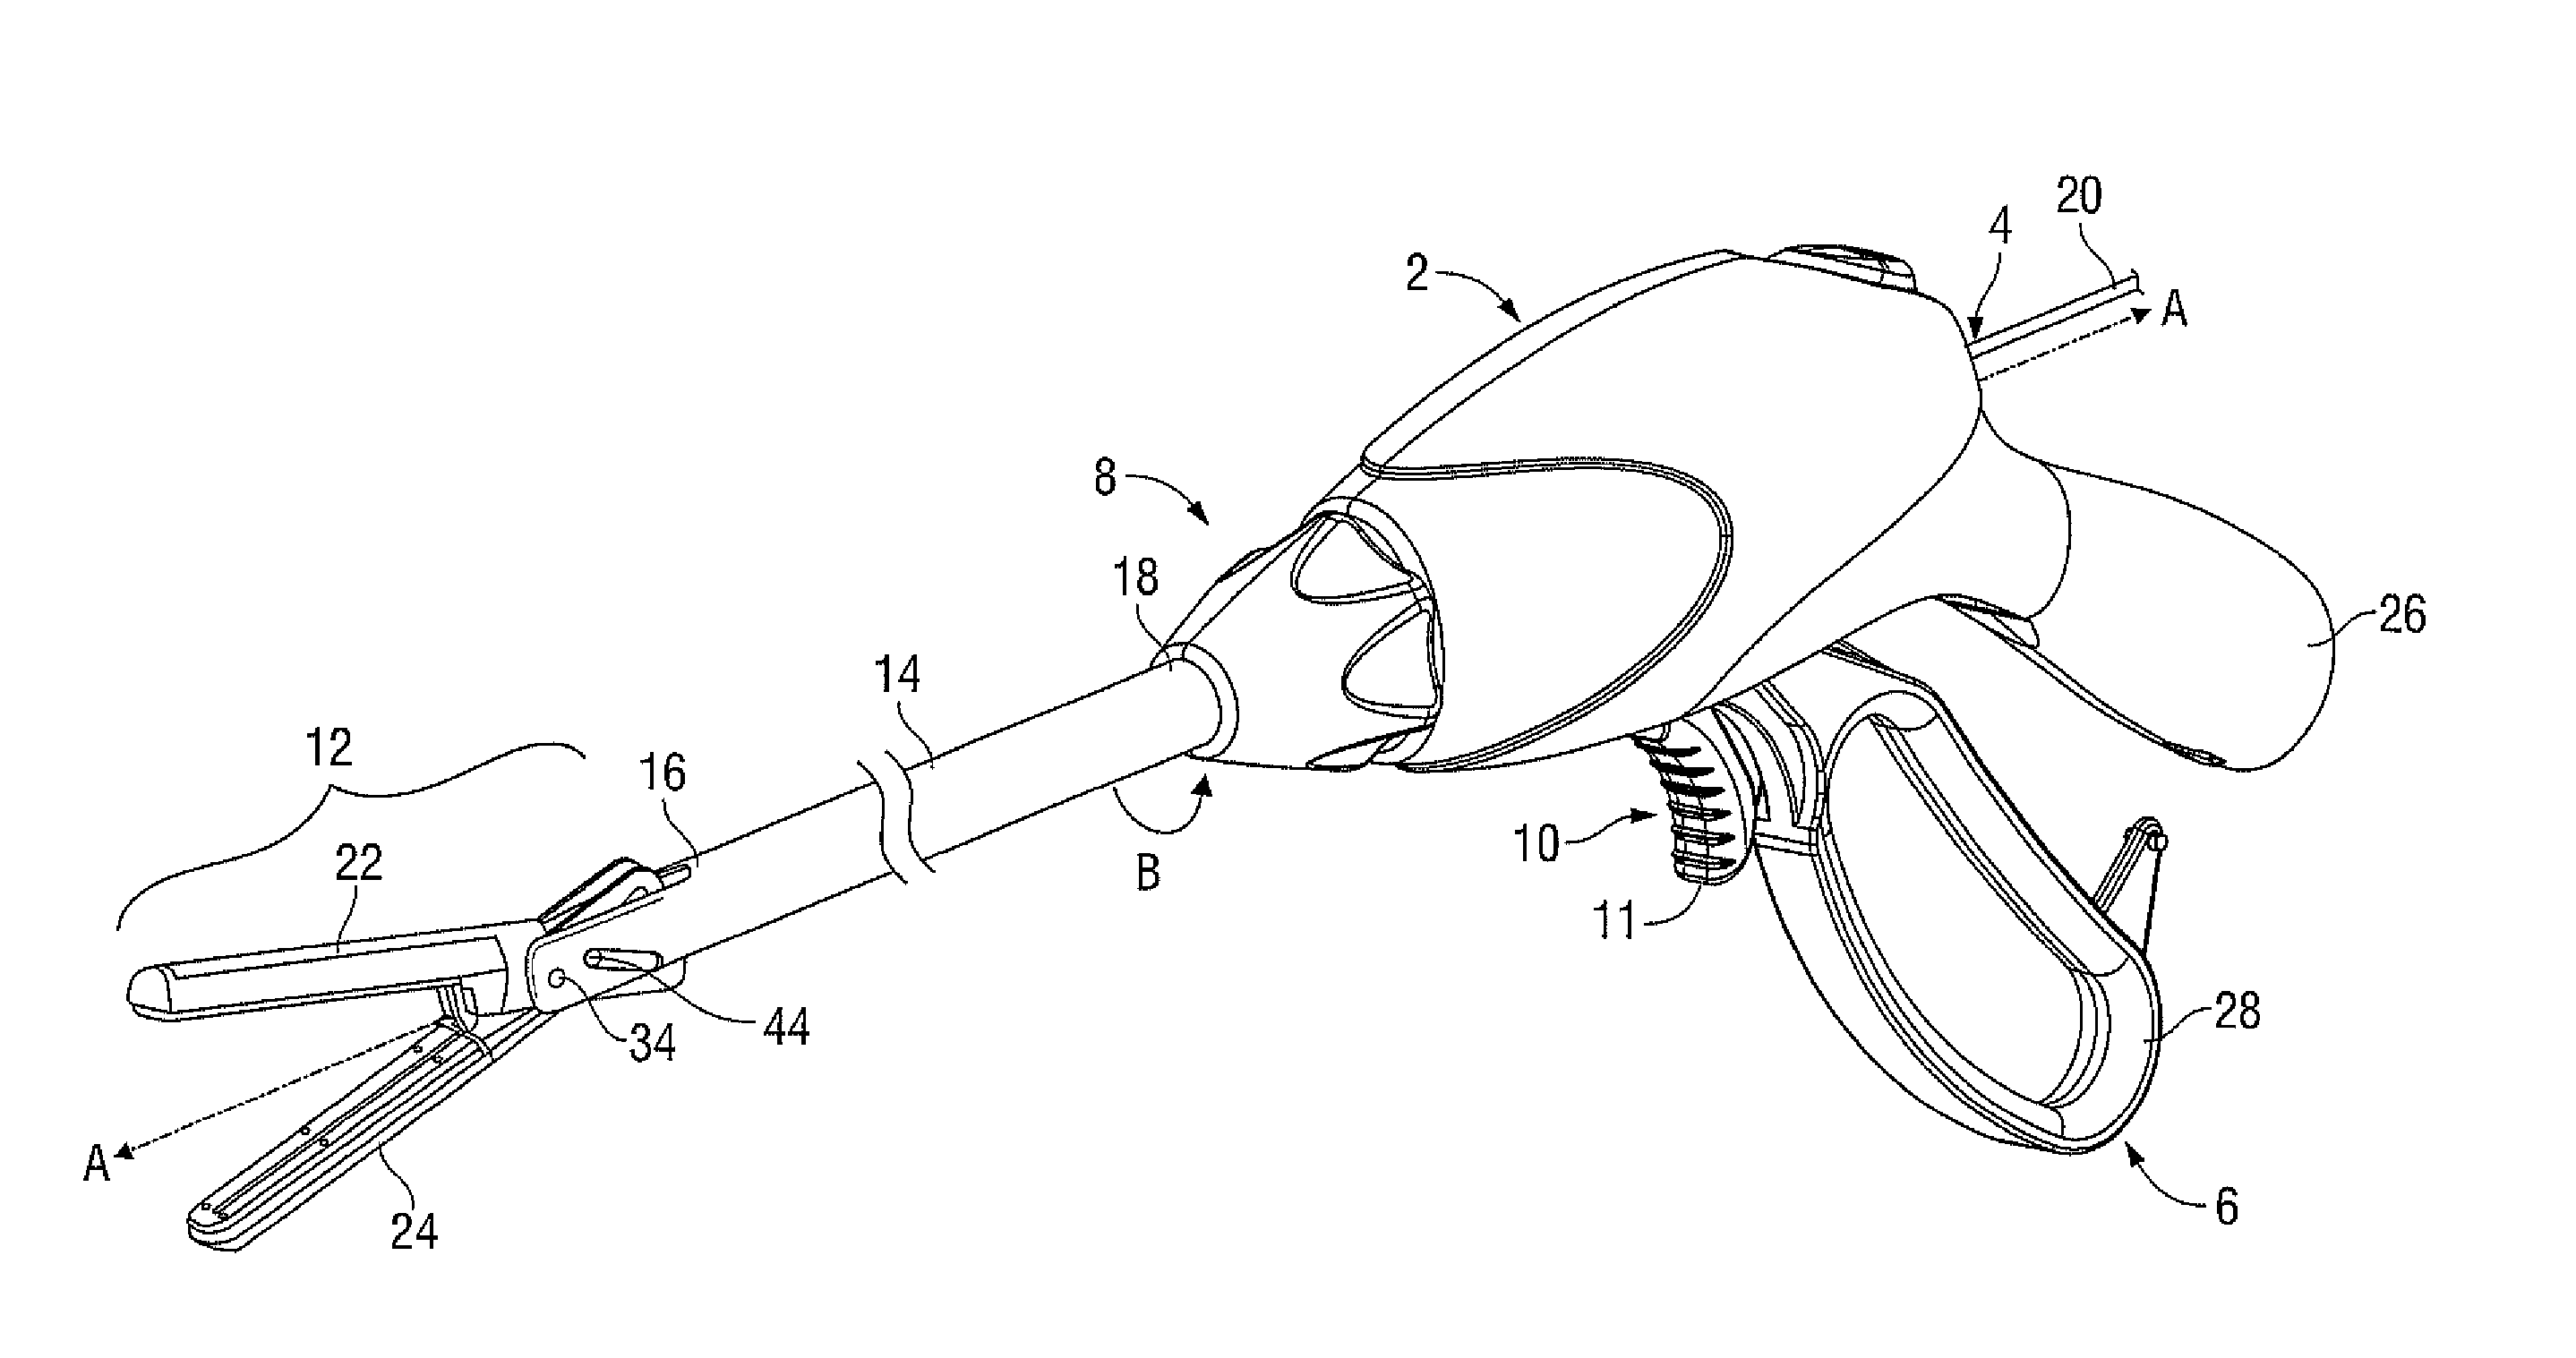 Electrosurgical Instrument with a Knife Blade Lockout Mechanism